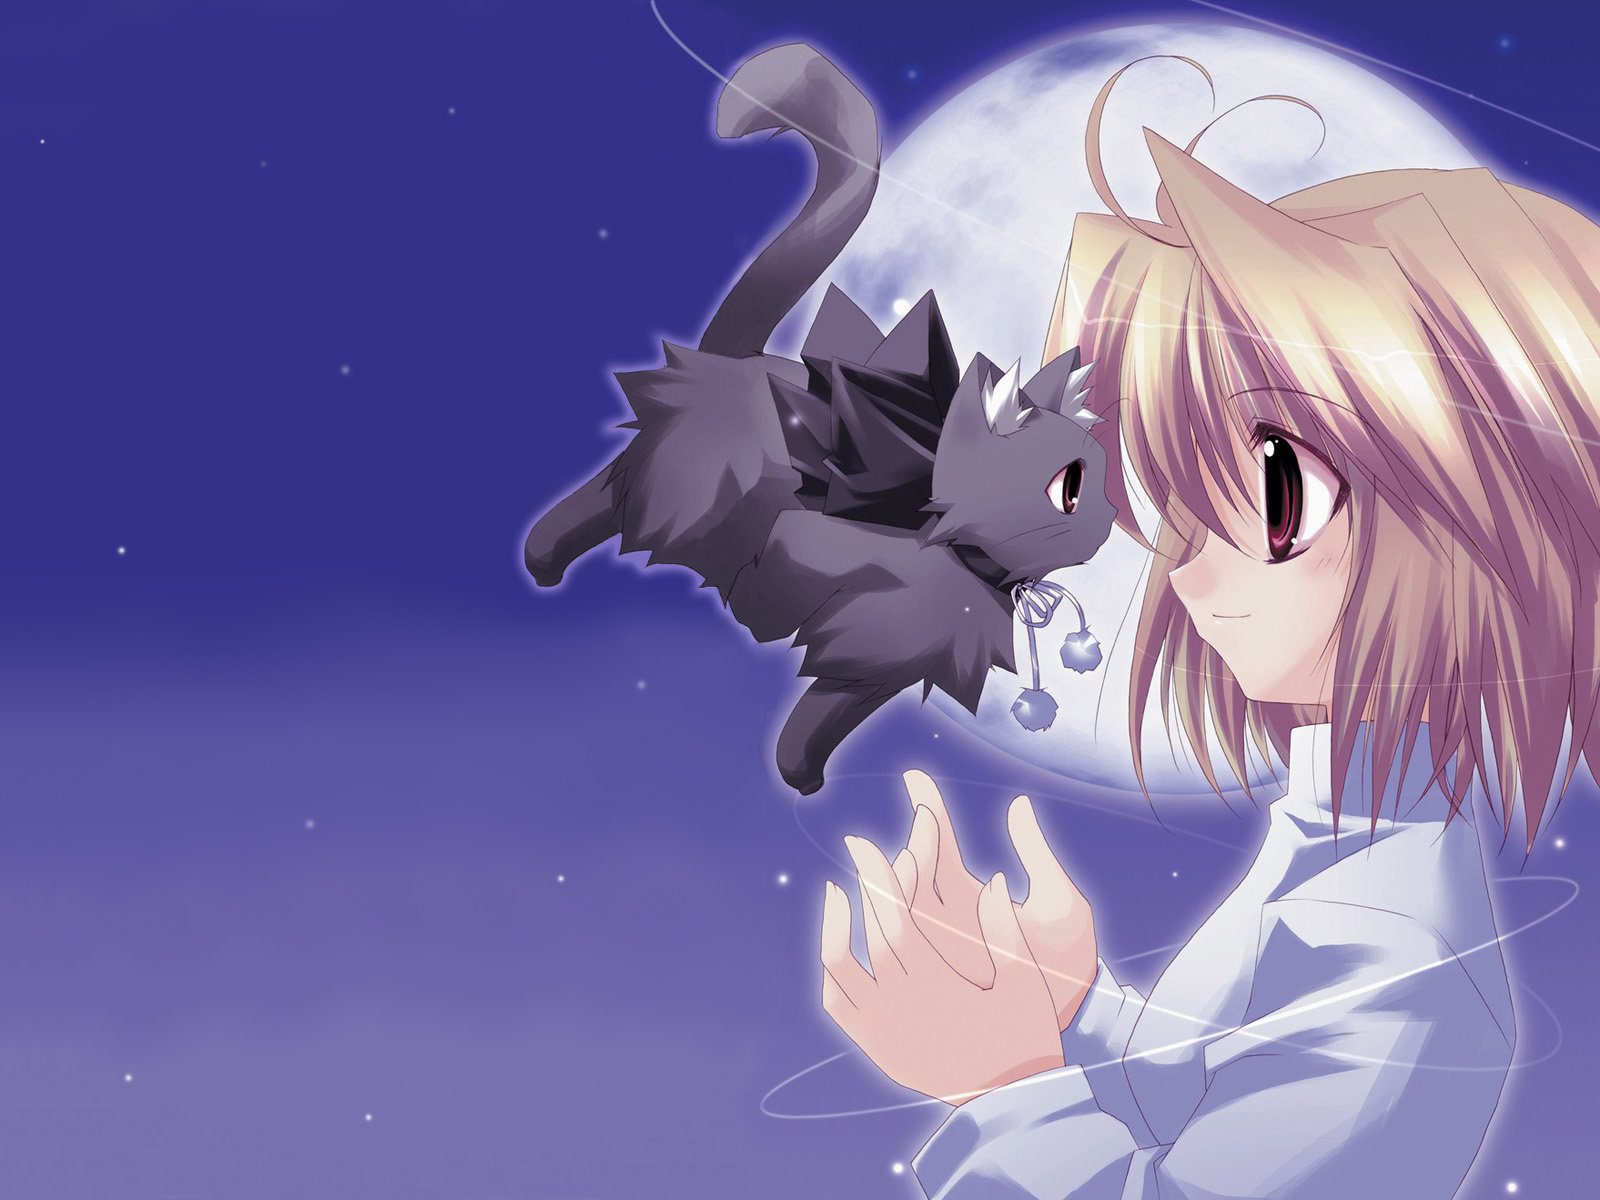 Cute anime cat drawing inactive (ice feather) - Illustrations ART street